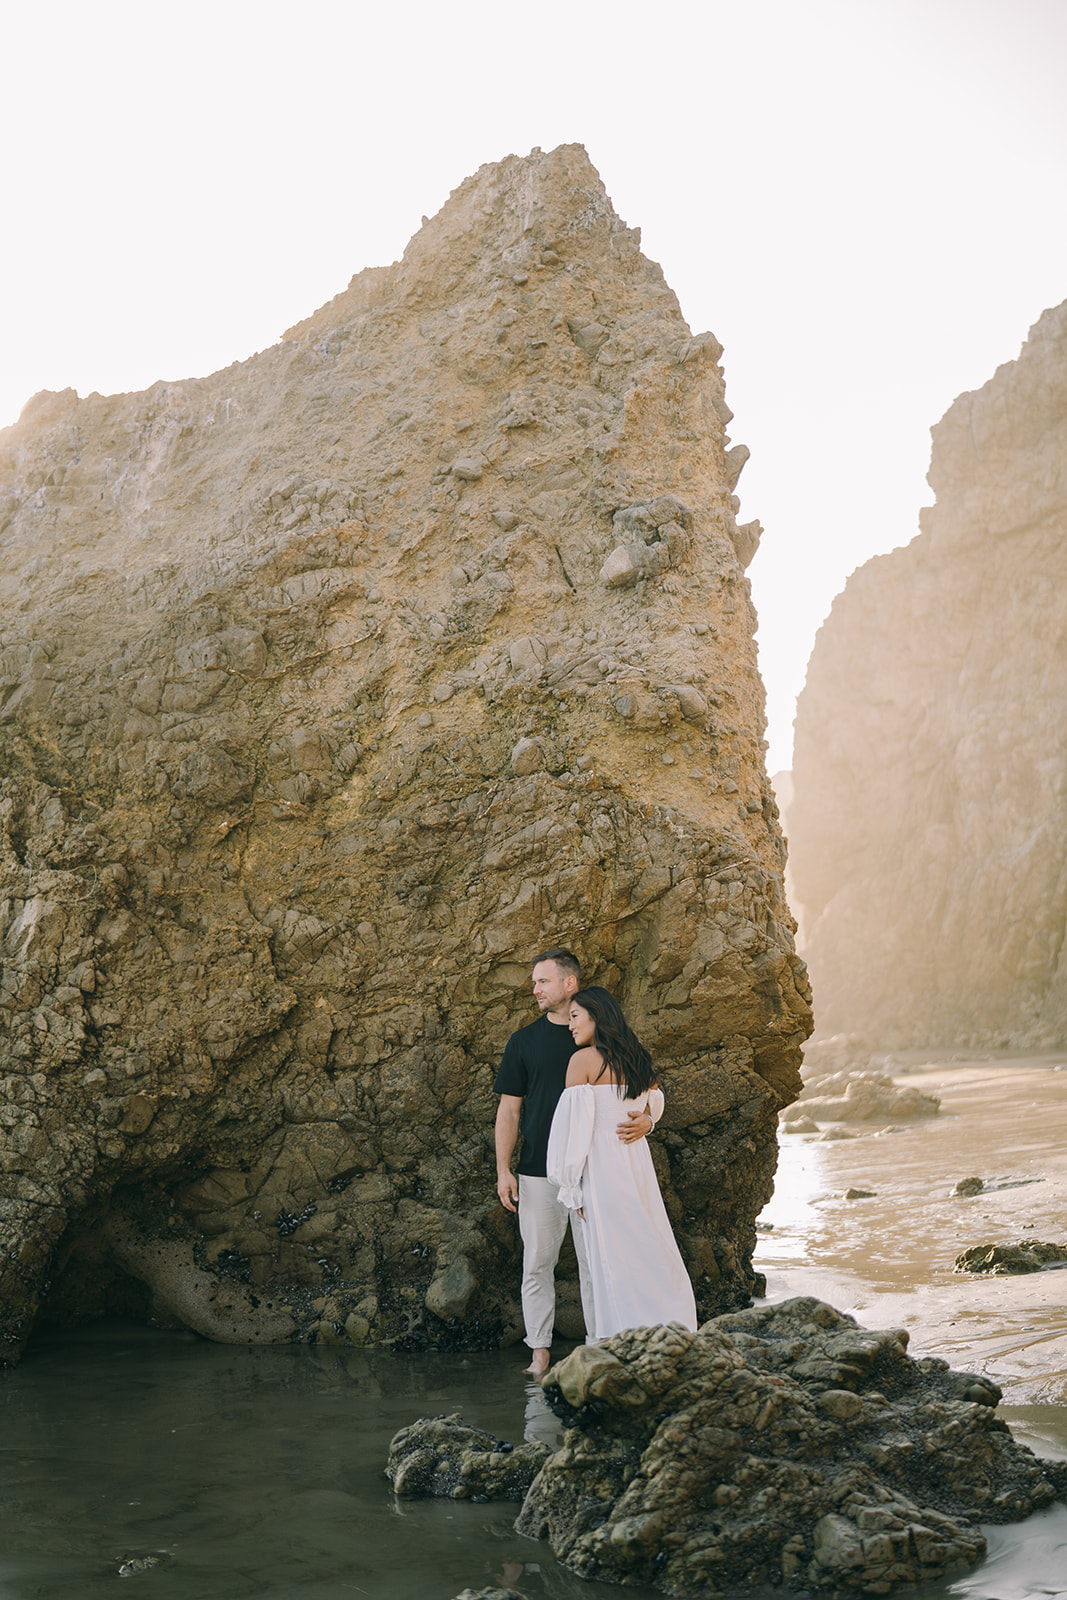 Couple in front of a large rock on the coastline embracing